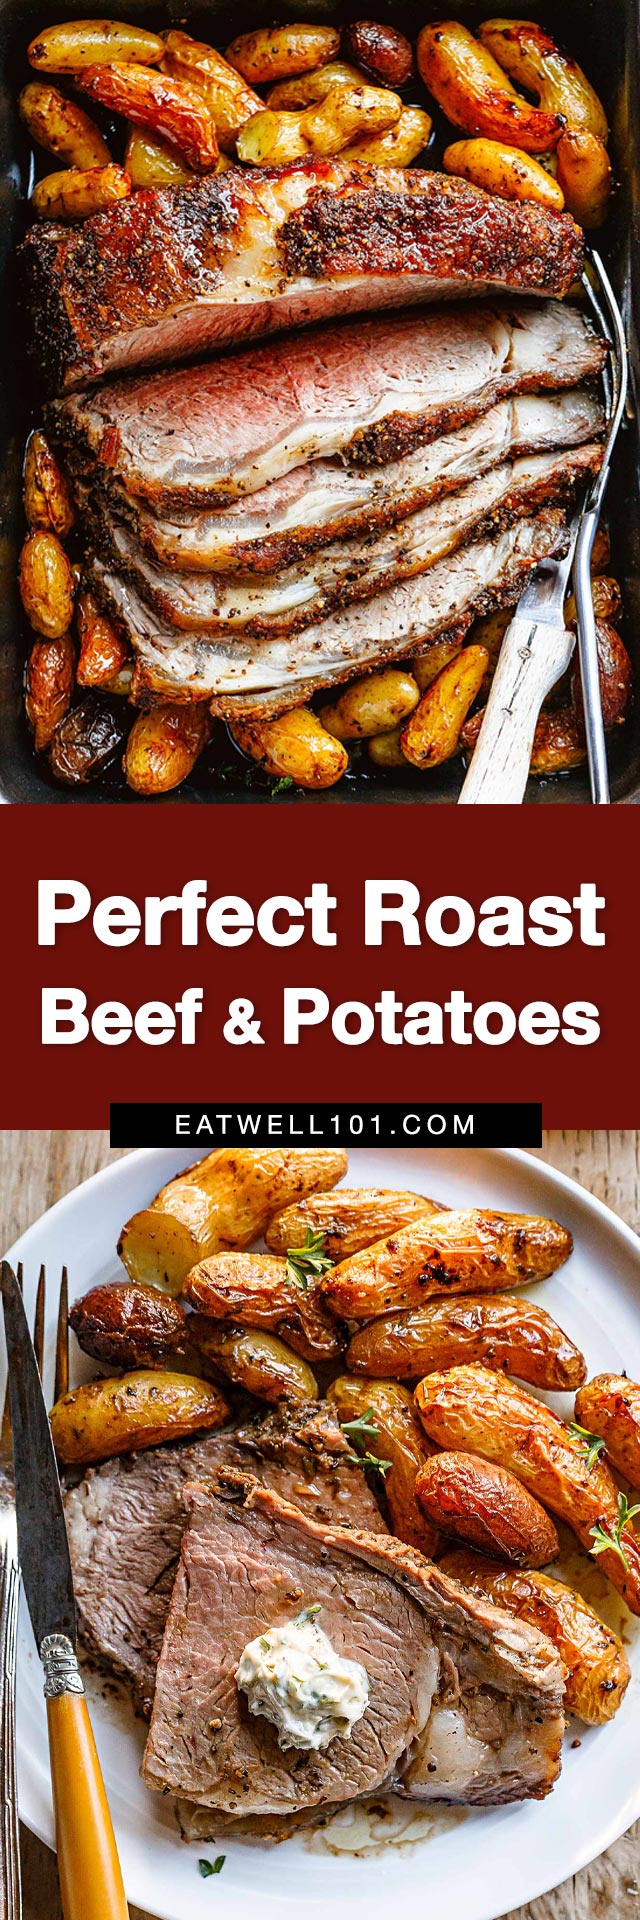 PerfectRoastBeef Recipe - #roast #beef #recipe #eatwell101 - A tender roast beef on top of rich fingerling potatoes with incredible flavors.